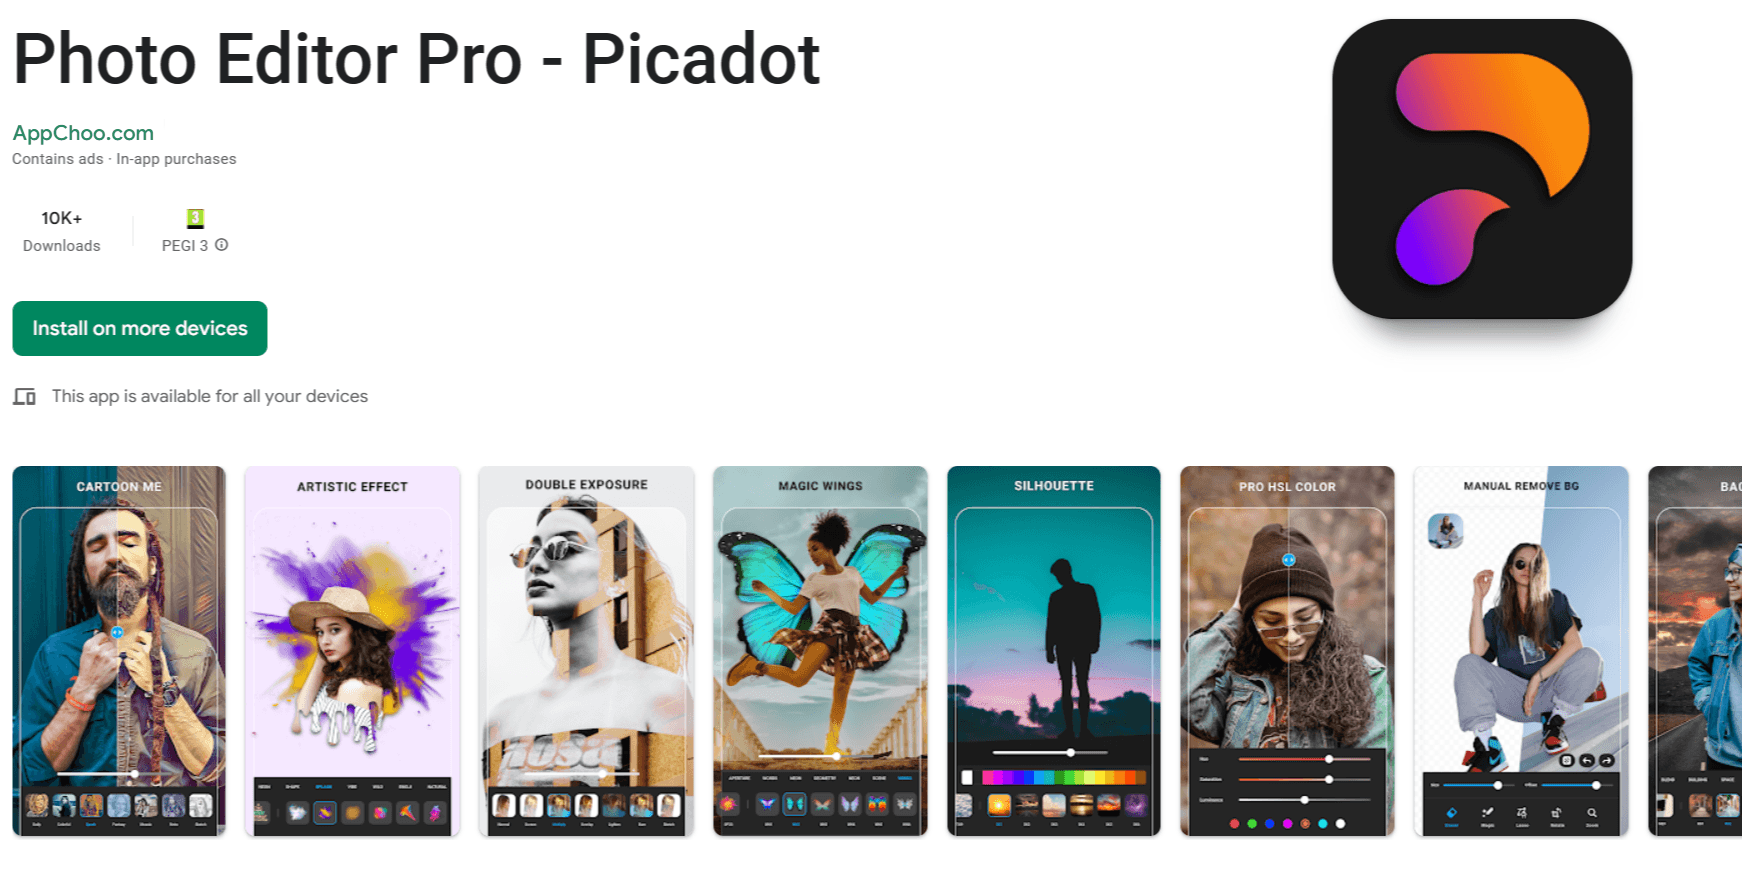 Photo Editor Pro - Picadot Android App